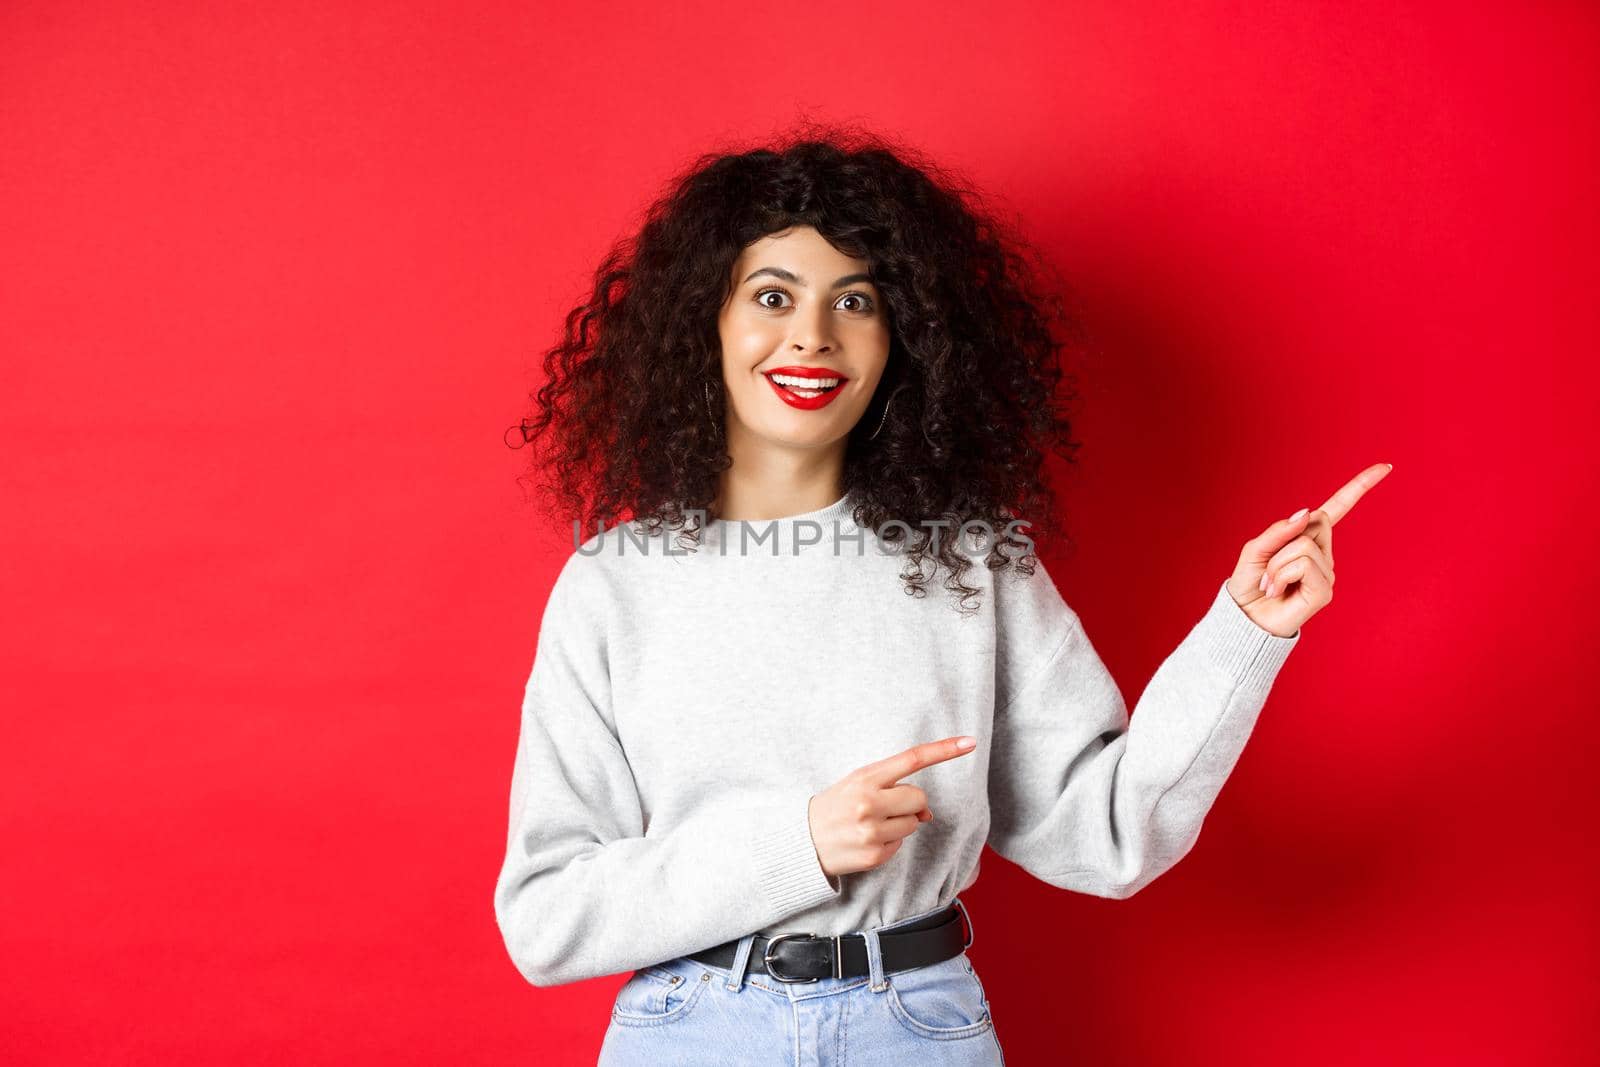 Amused young woman with curly hairstyle, pointing fingers right at logo, looking impressed and excited, checking out promotion, red background.